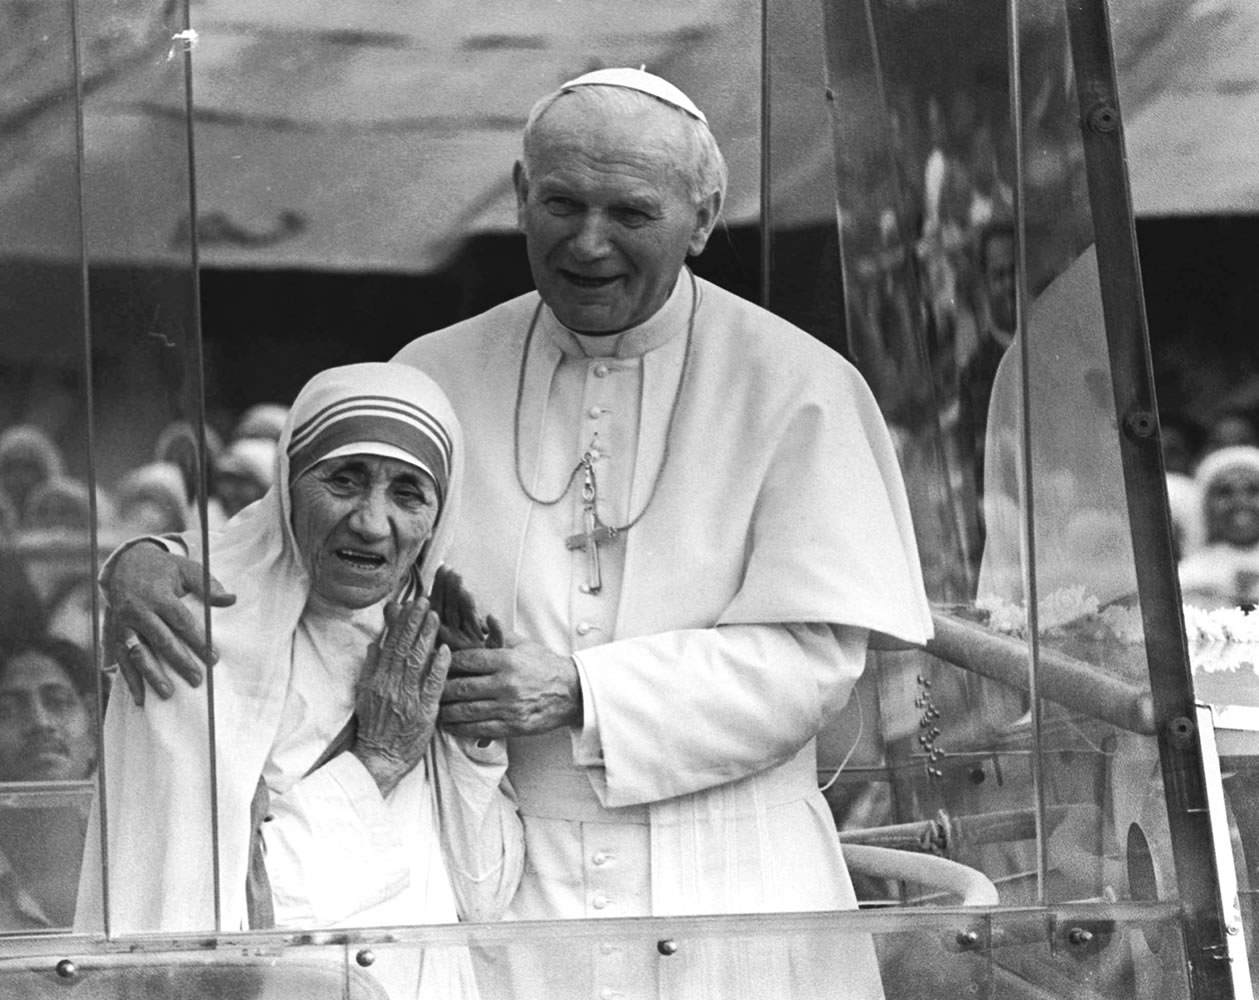 Pope John Paul II puts his arm around Mother Teresa as they ride in the Popemobile in 1986 outside the Home of the Dying in Kolkata, India. Mother Teresa will be declared a saint next year.